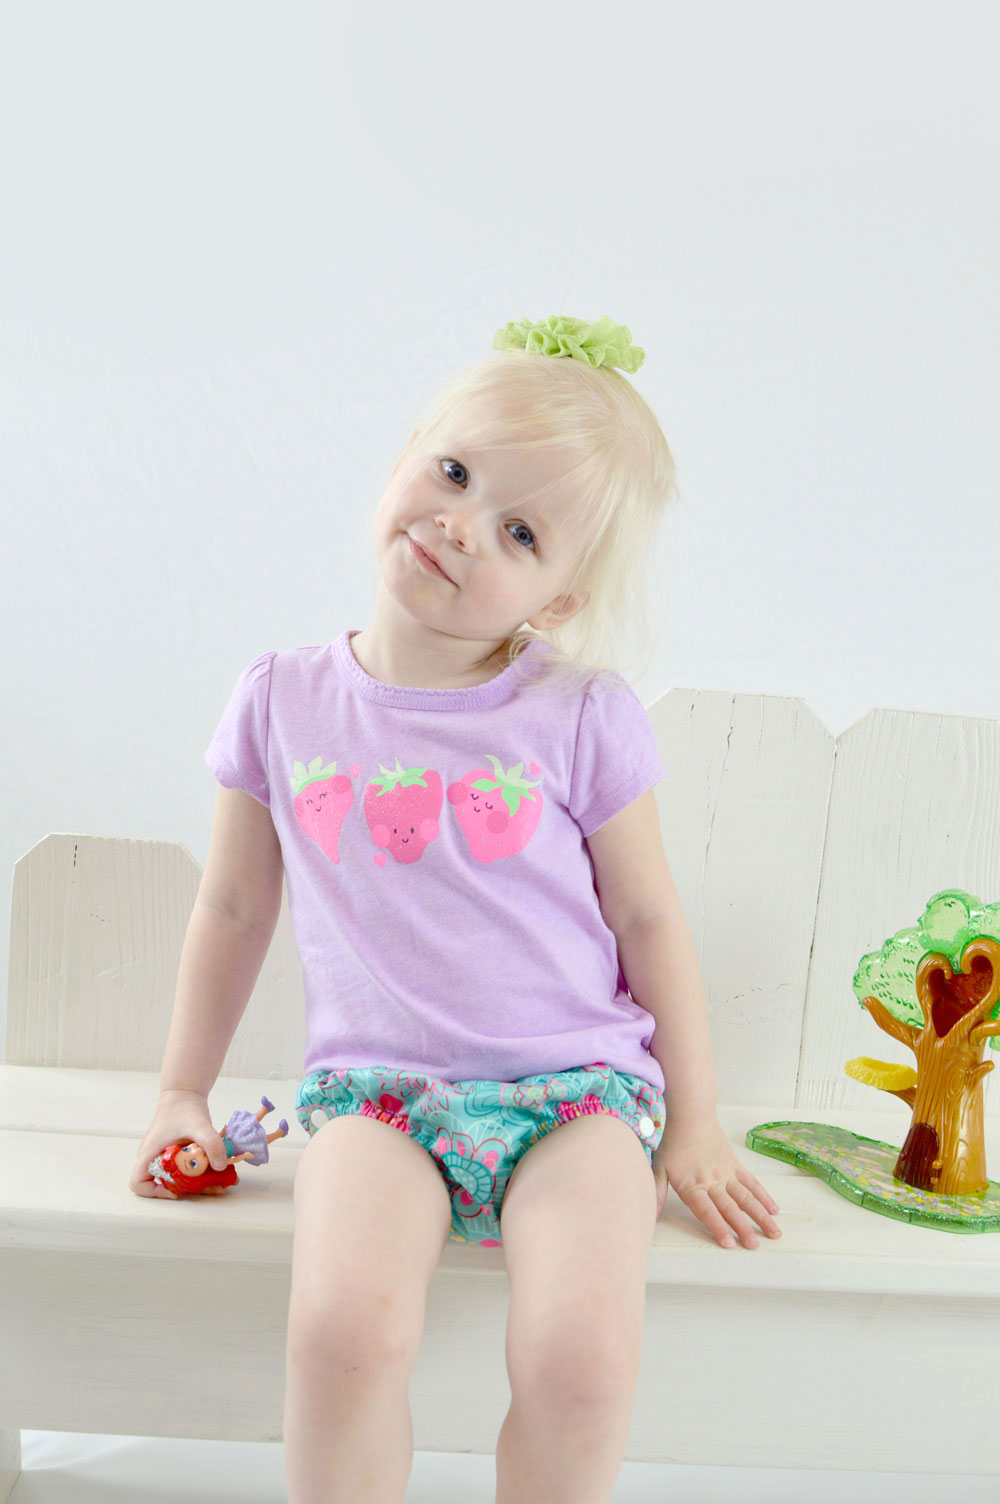 5 Potty Training Tips for Toddlers and cute Charlie Banana pullups